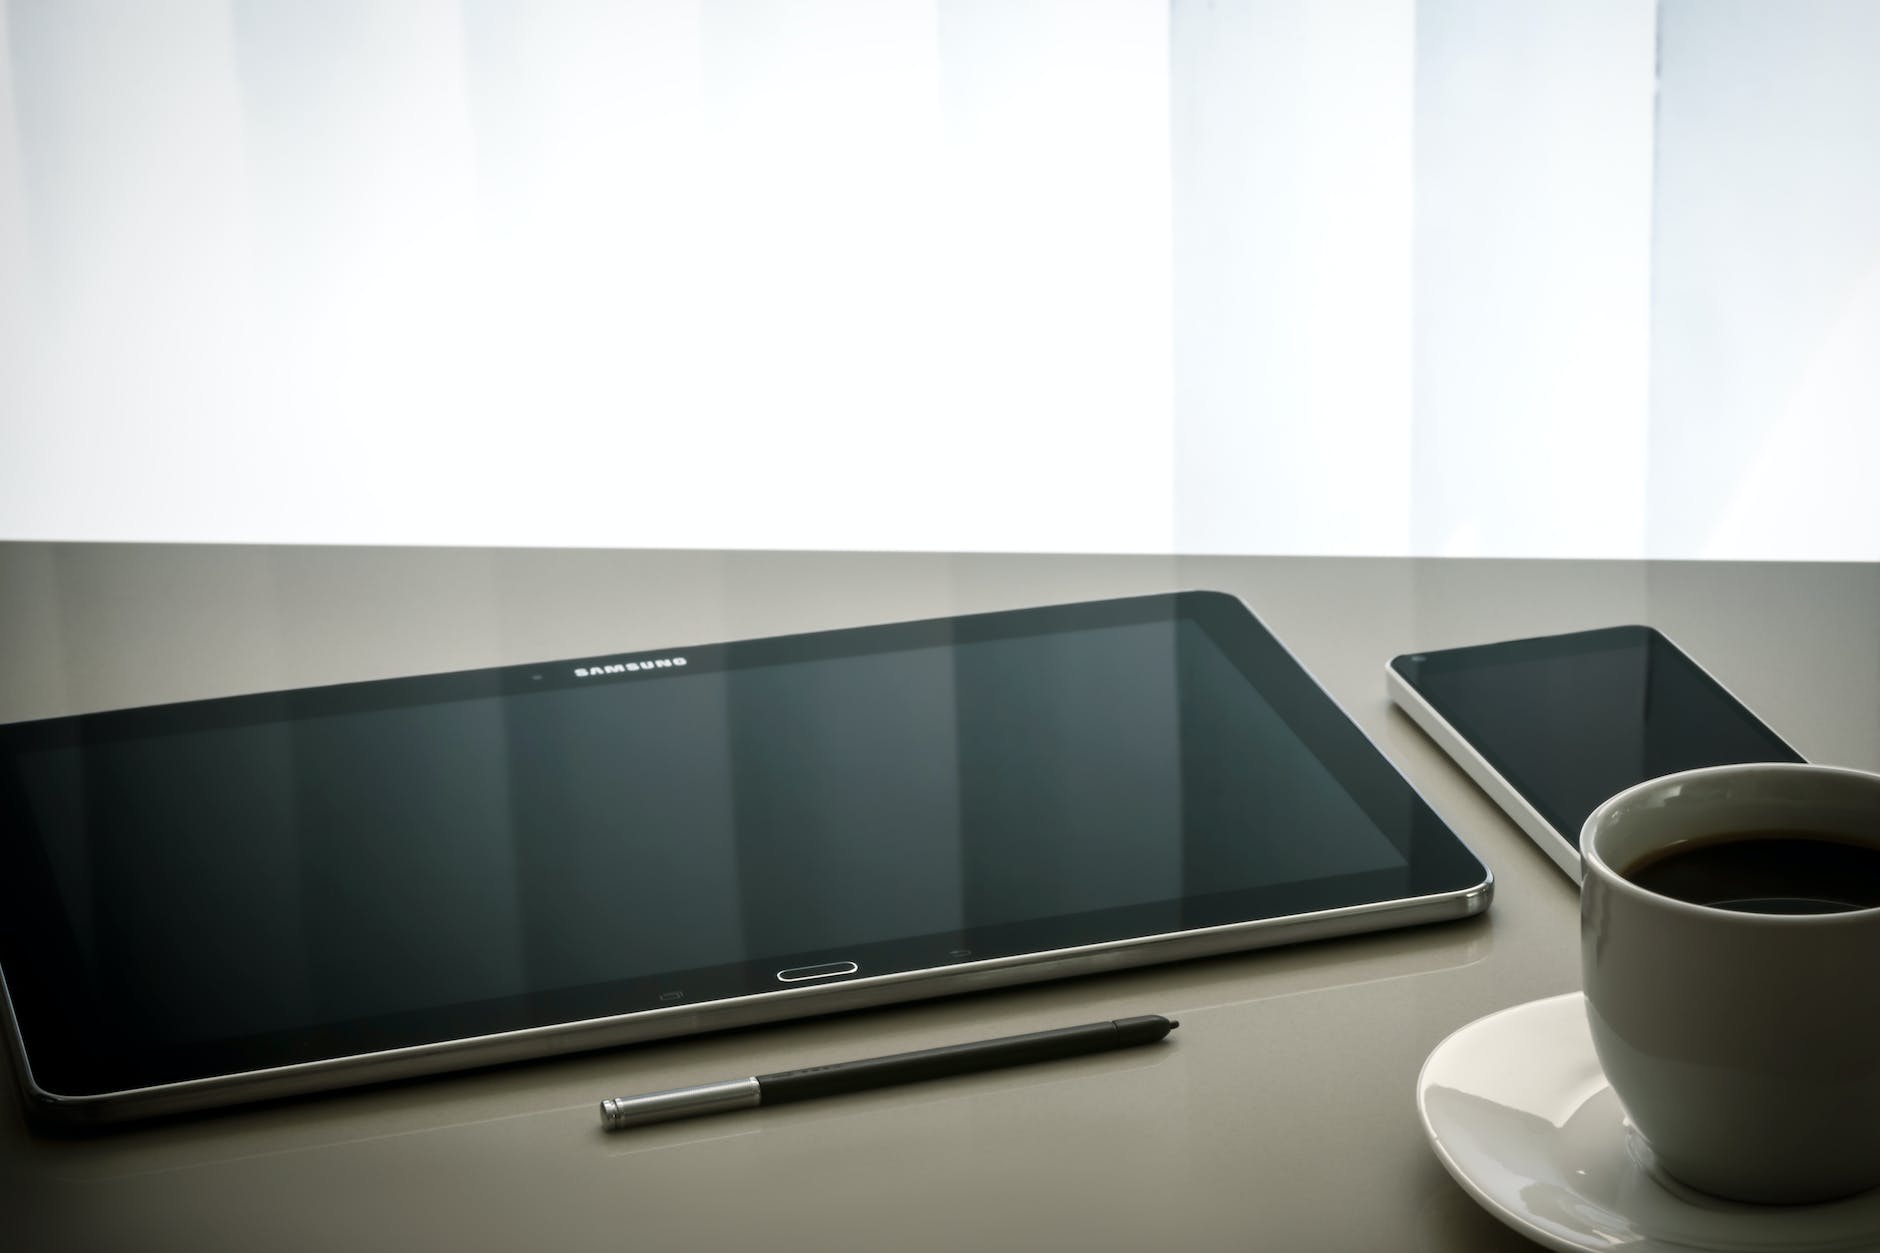 black samsung android tablet computer beside stylus pen